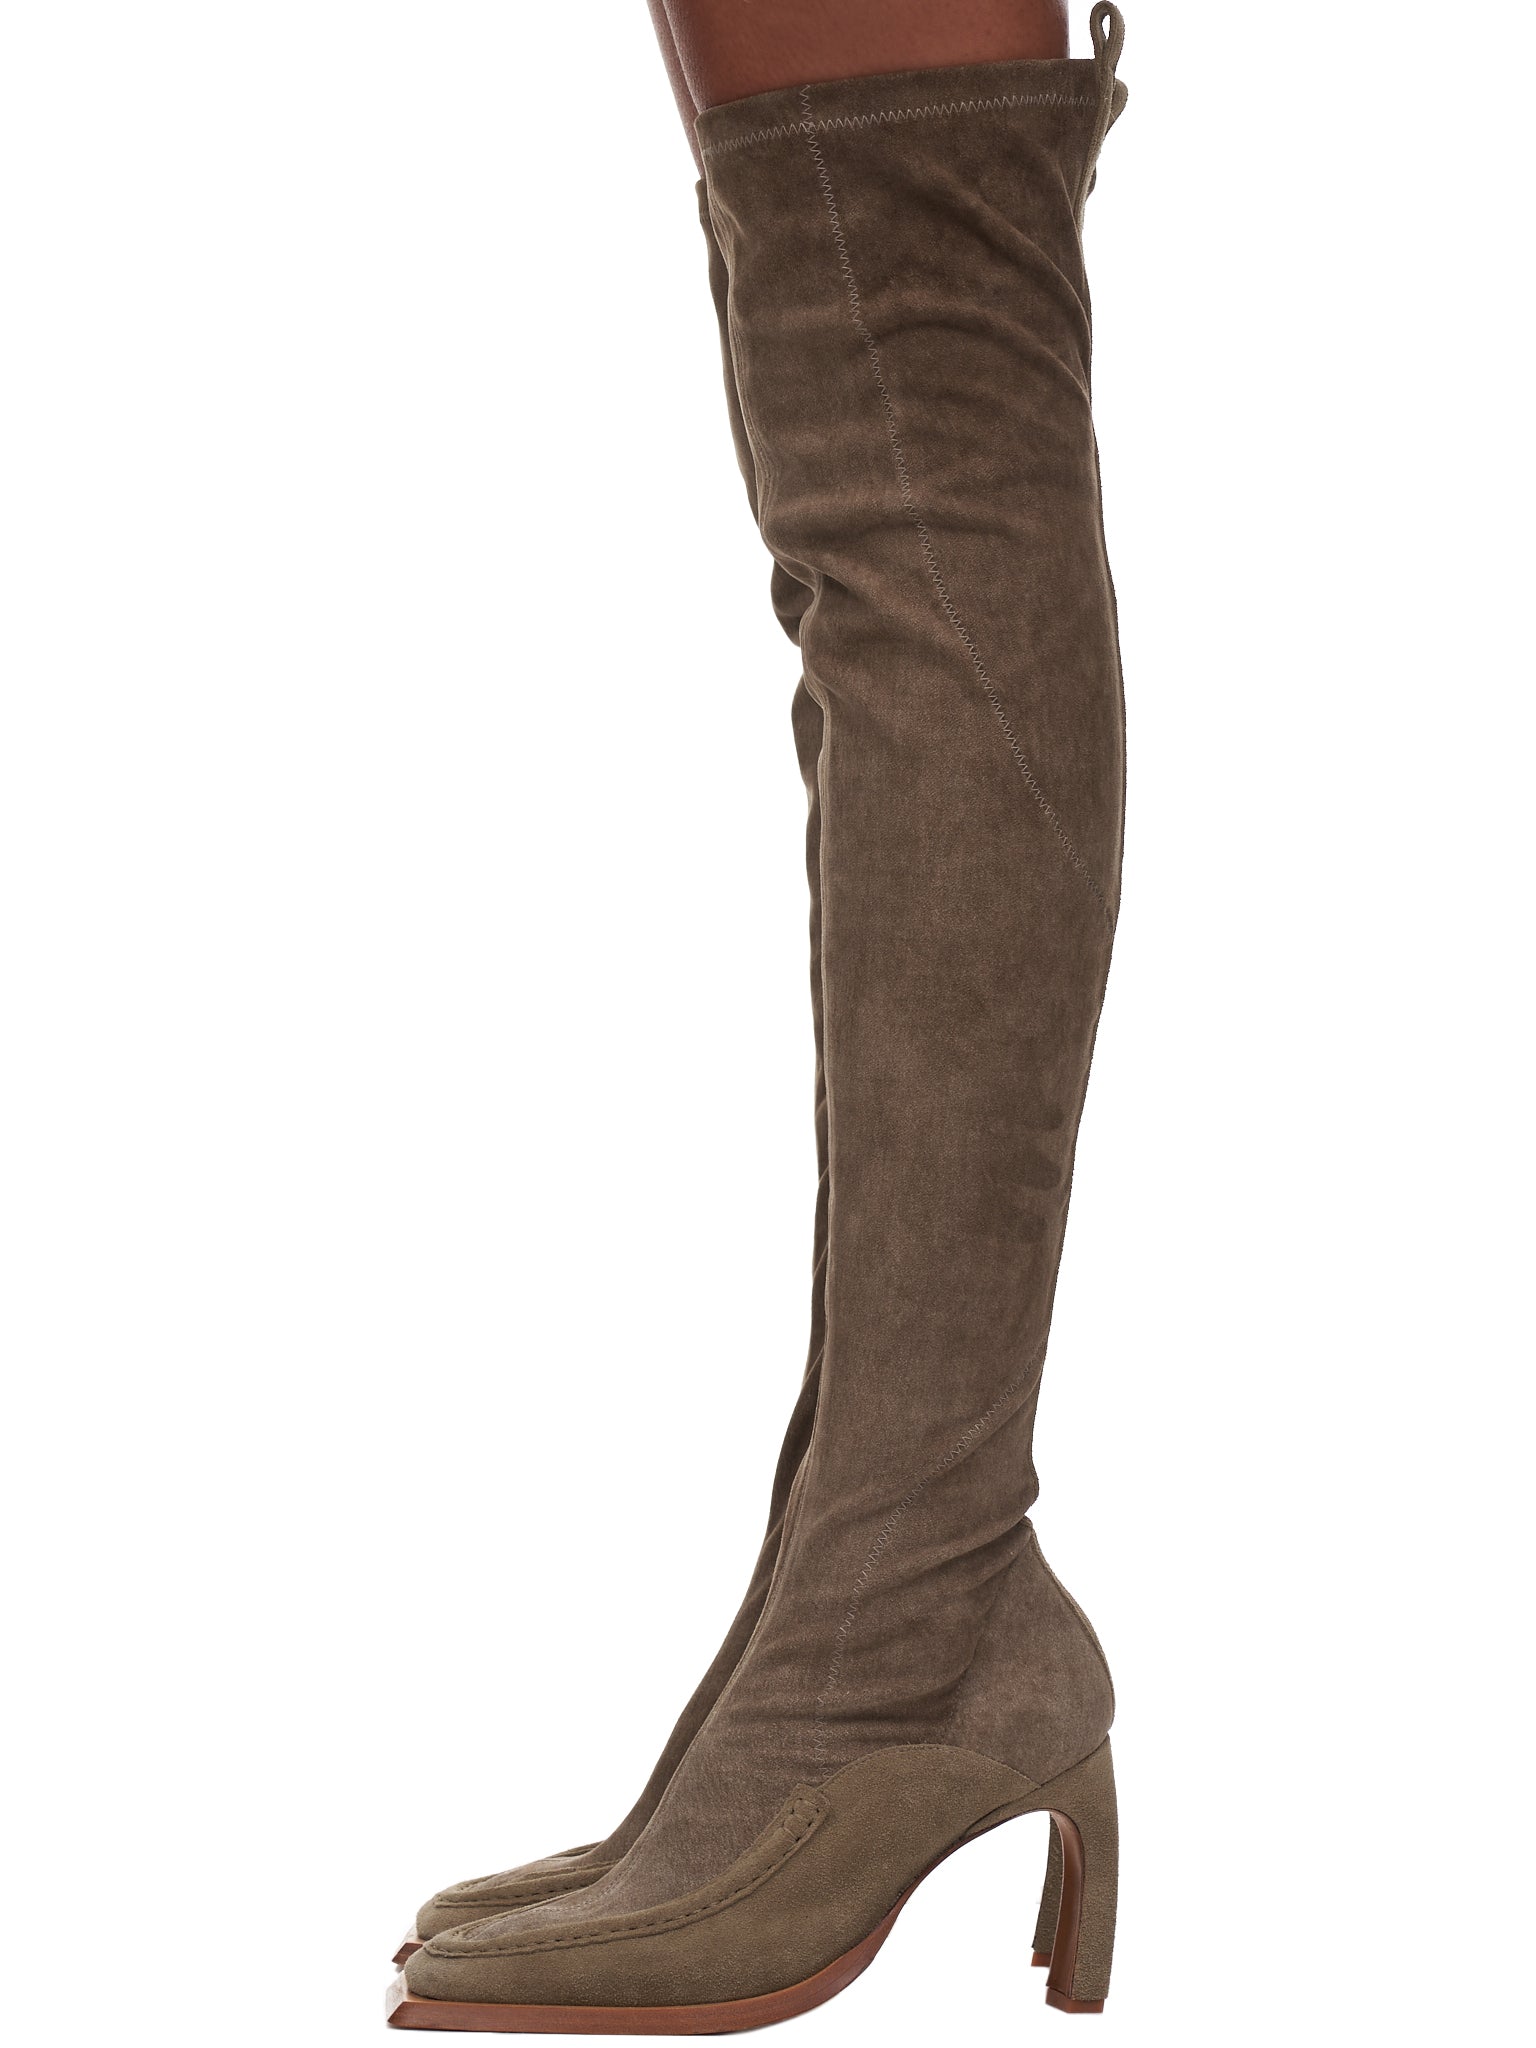 Charlotte Knowles Fawn Boots | H. Lorenzo - side 2